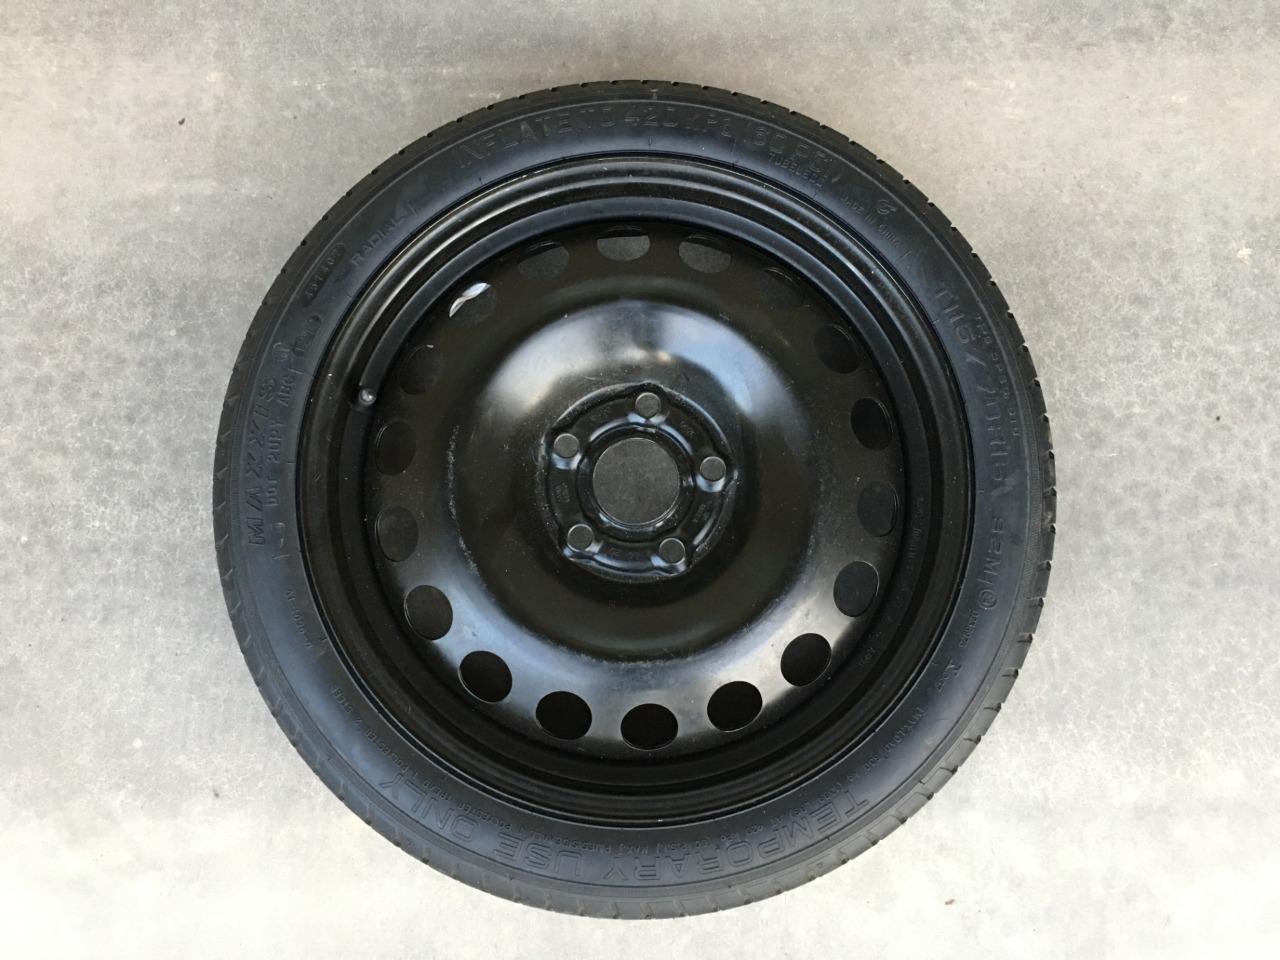 2012-2020 Chevrolet Sonic Emergency Spare Tire Wheel T125/70R16 Maxxis OEM